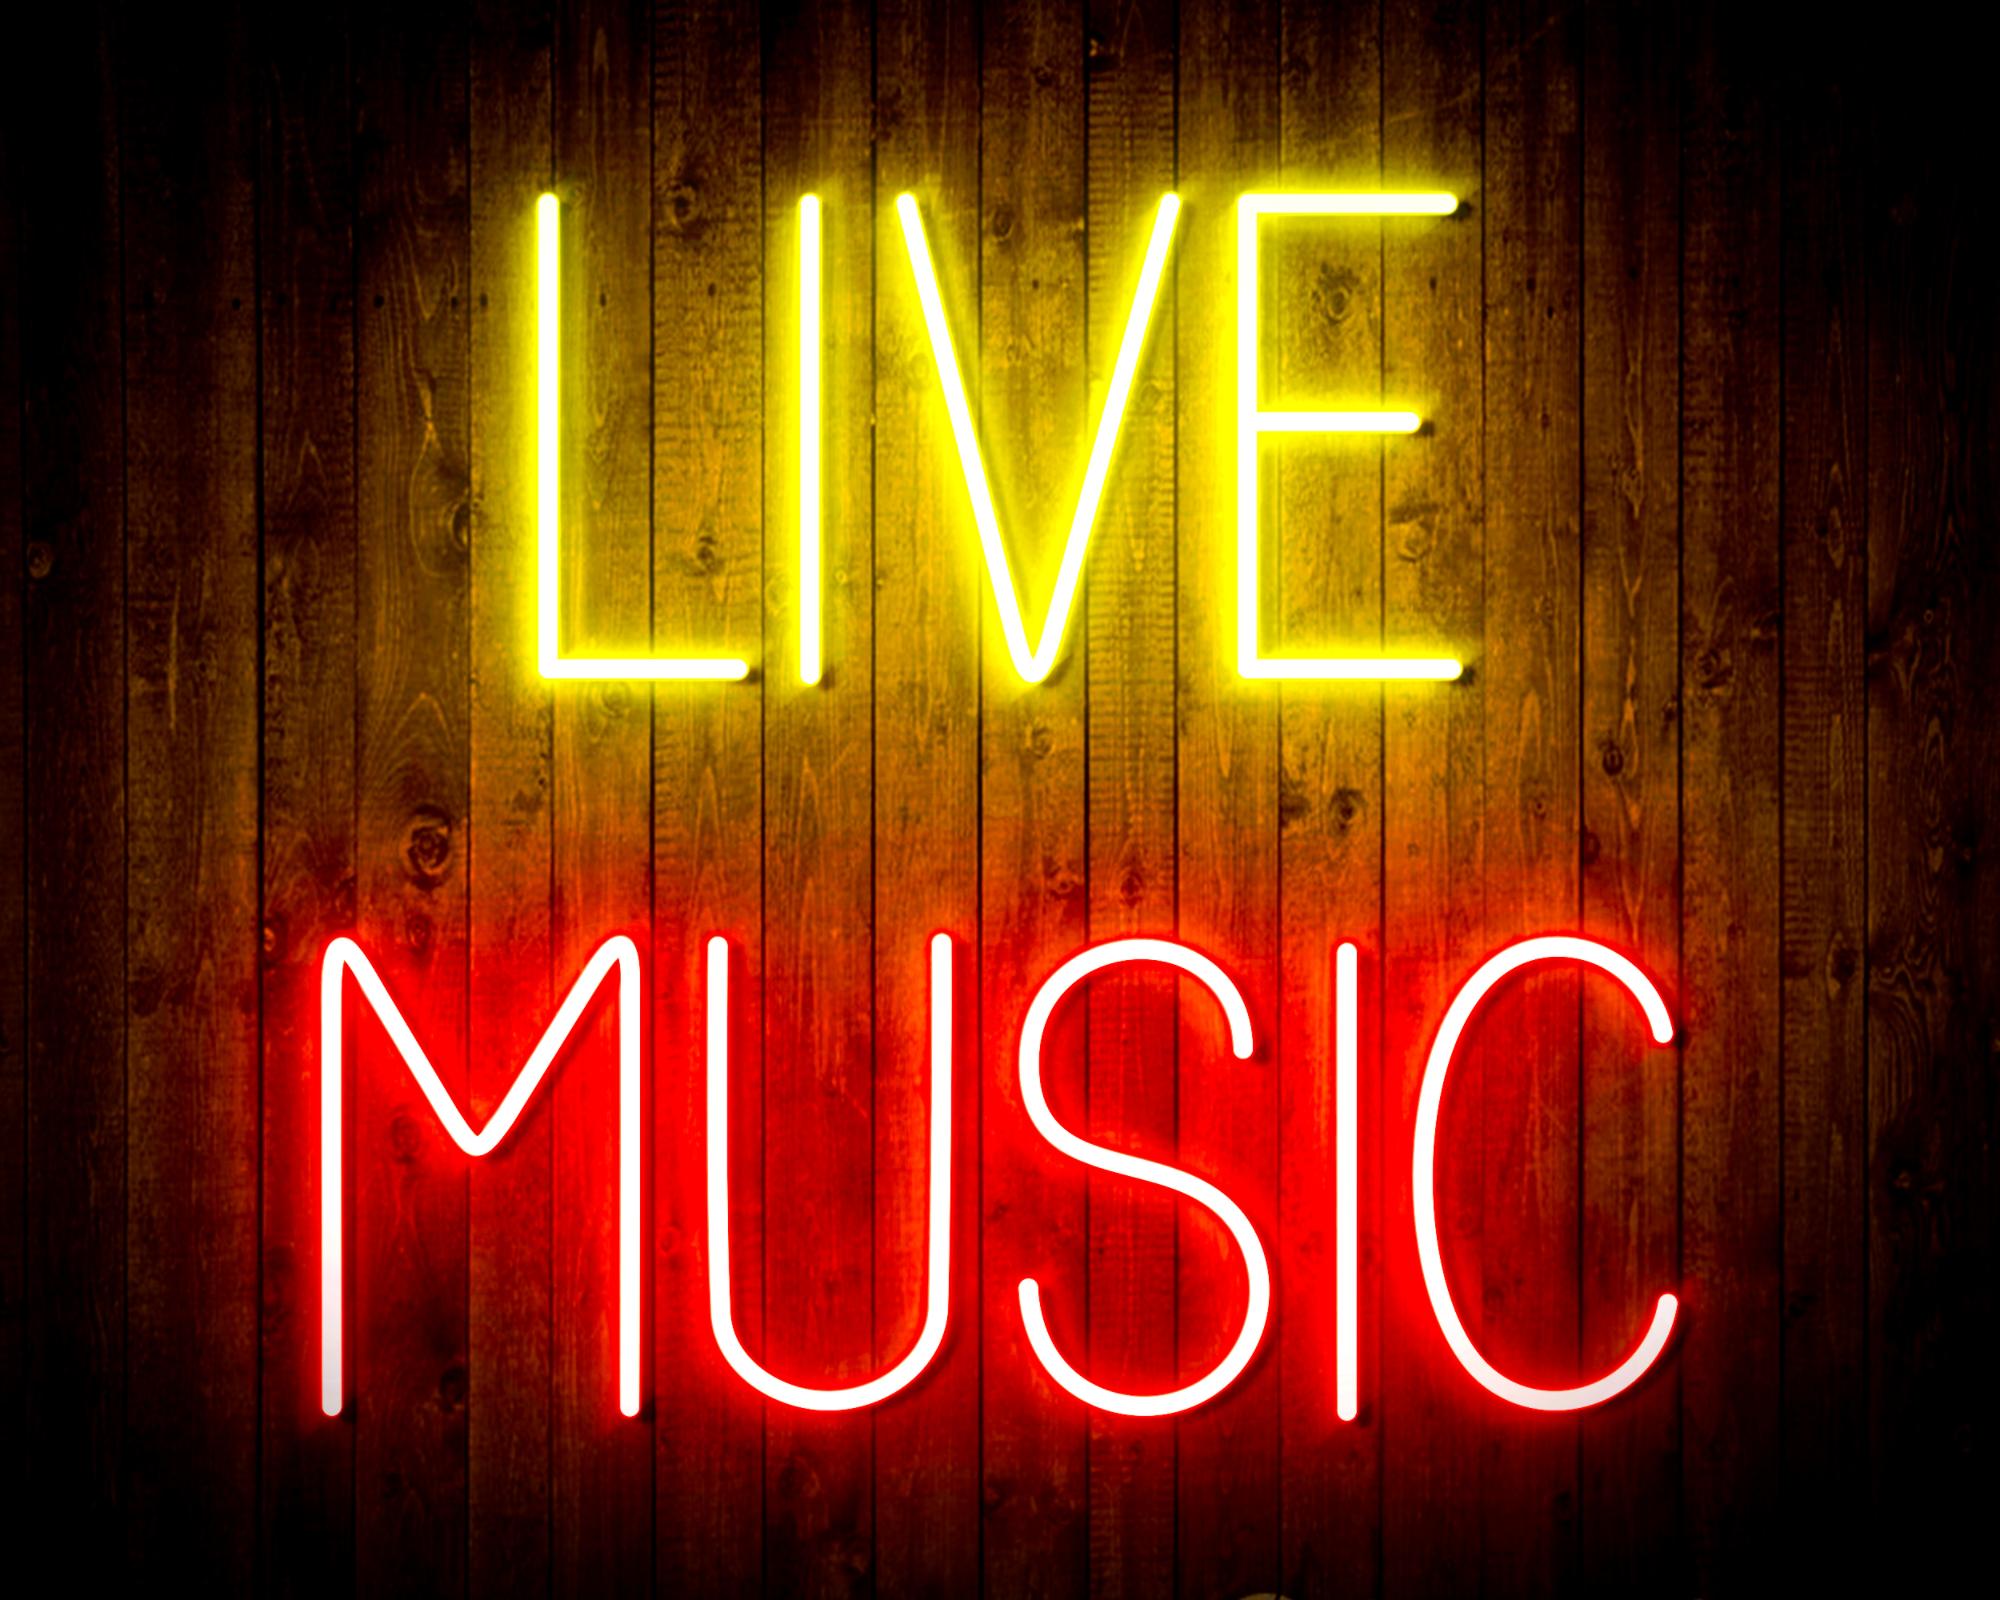 Live Music LED Neon Sign Wall Light